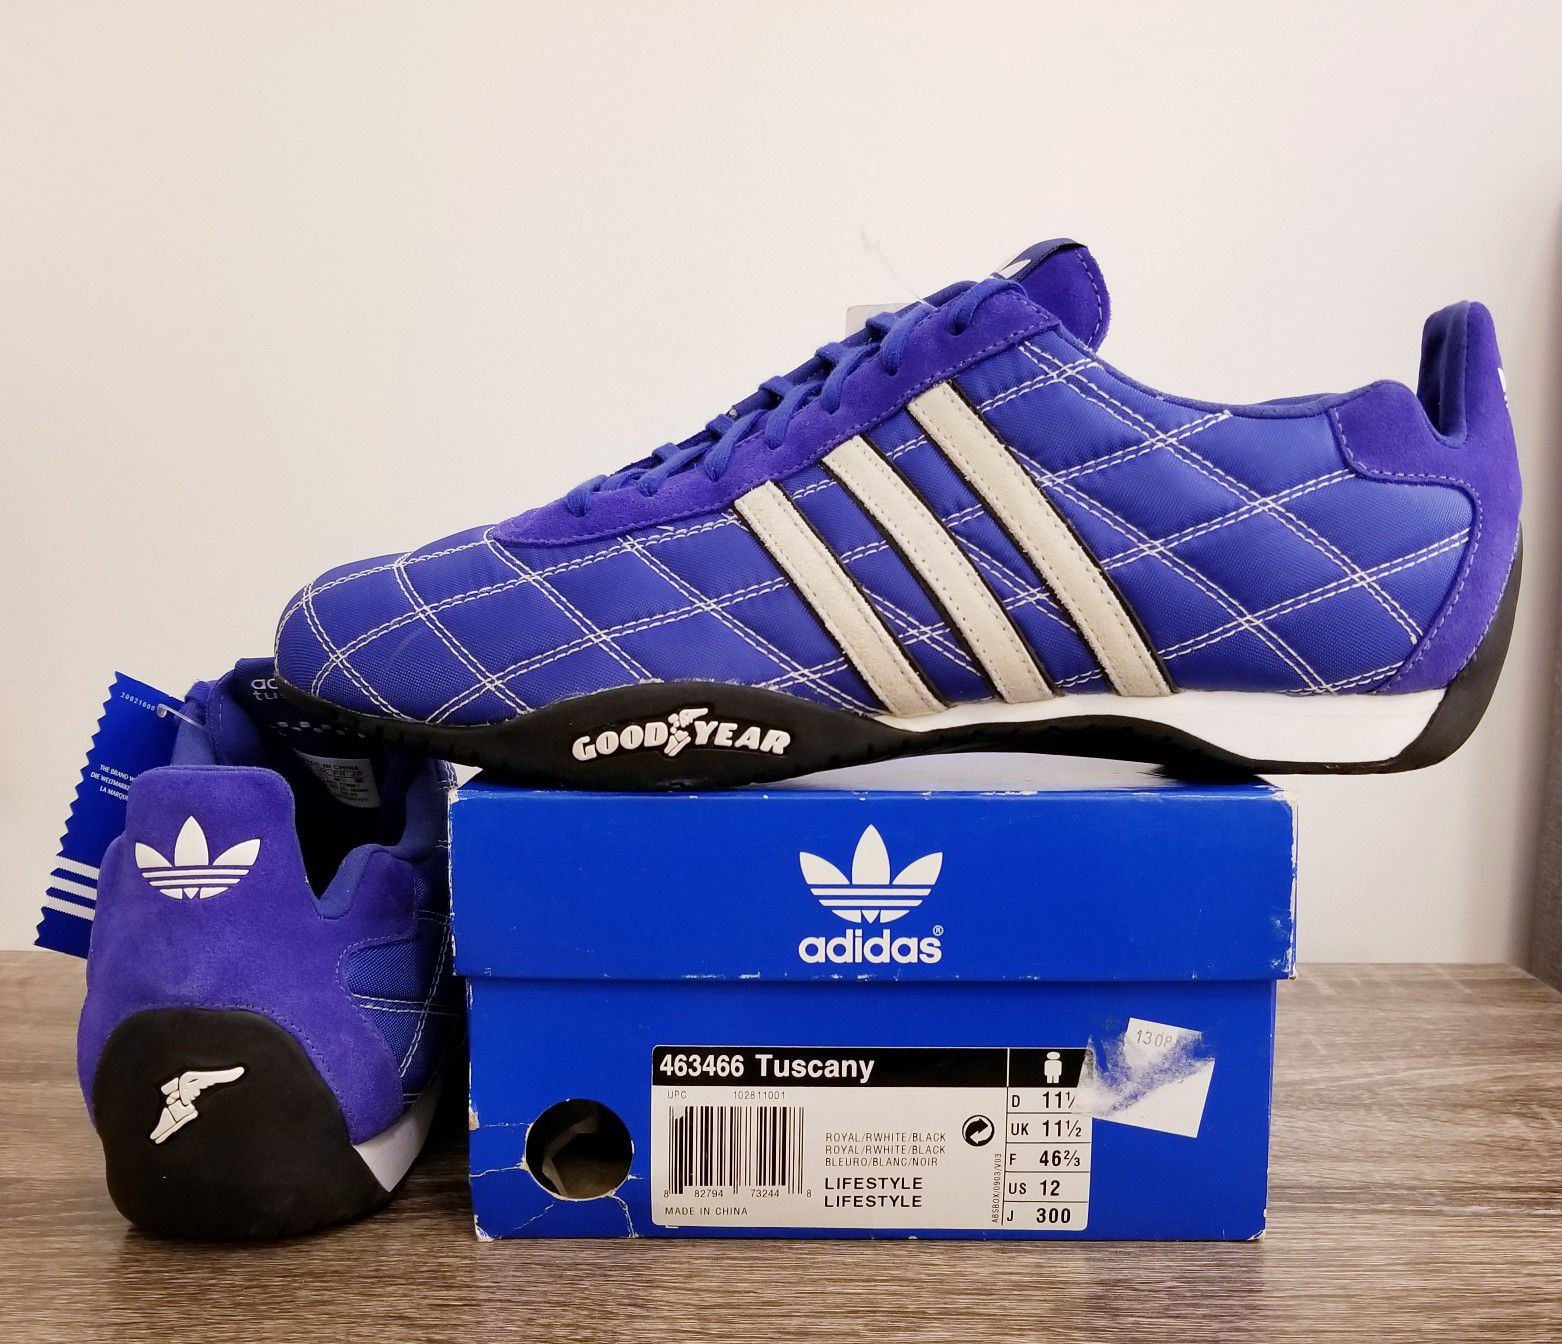 discordia pegamento Lo siento Adidas Tuscany Goodyear GP Race for Sale in San Marcos, CA - OfferUp